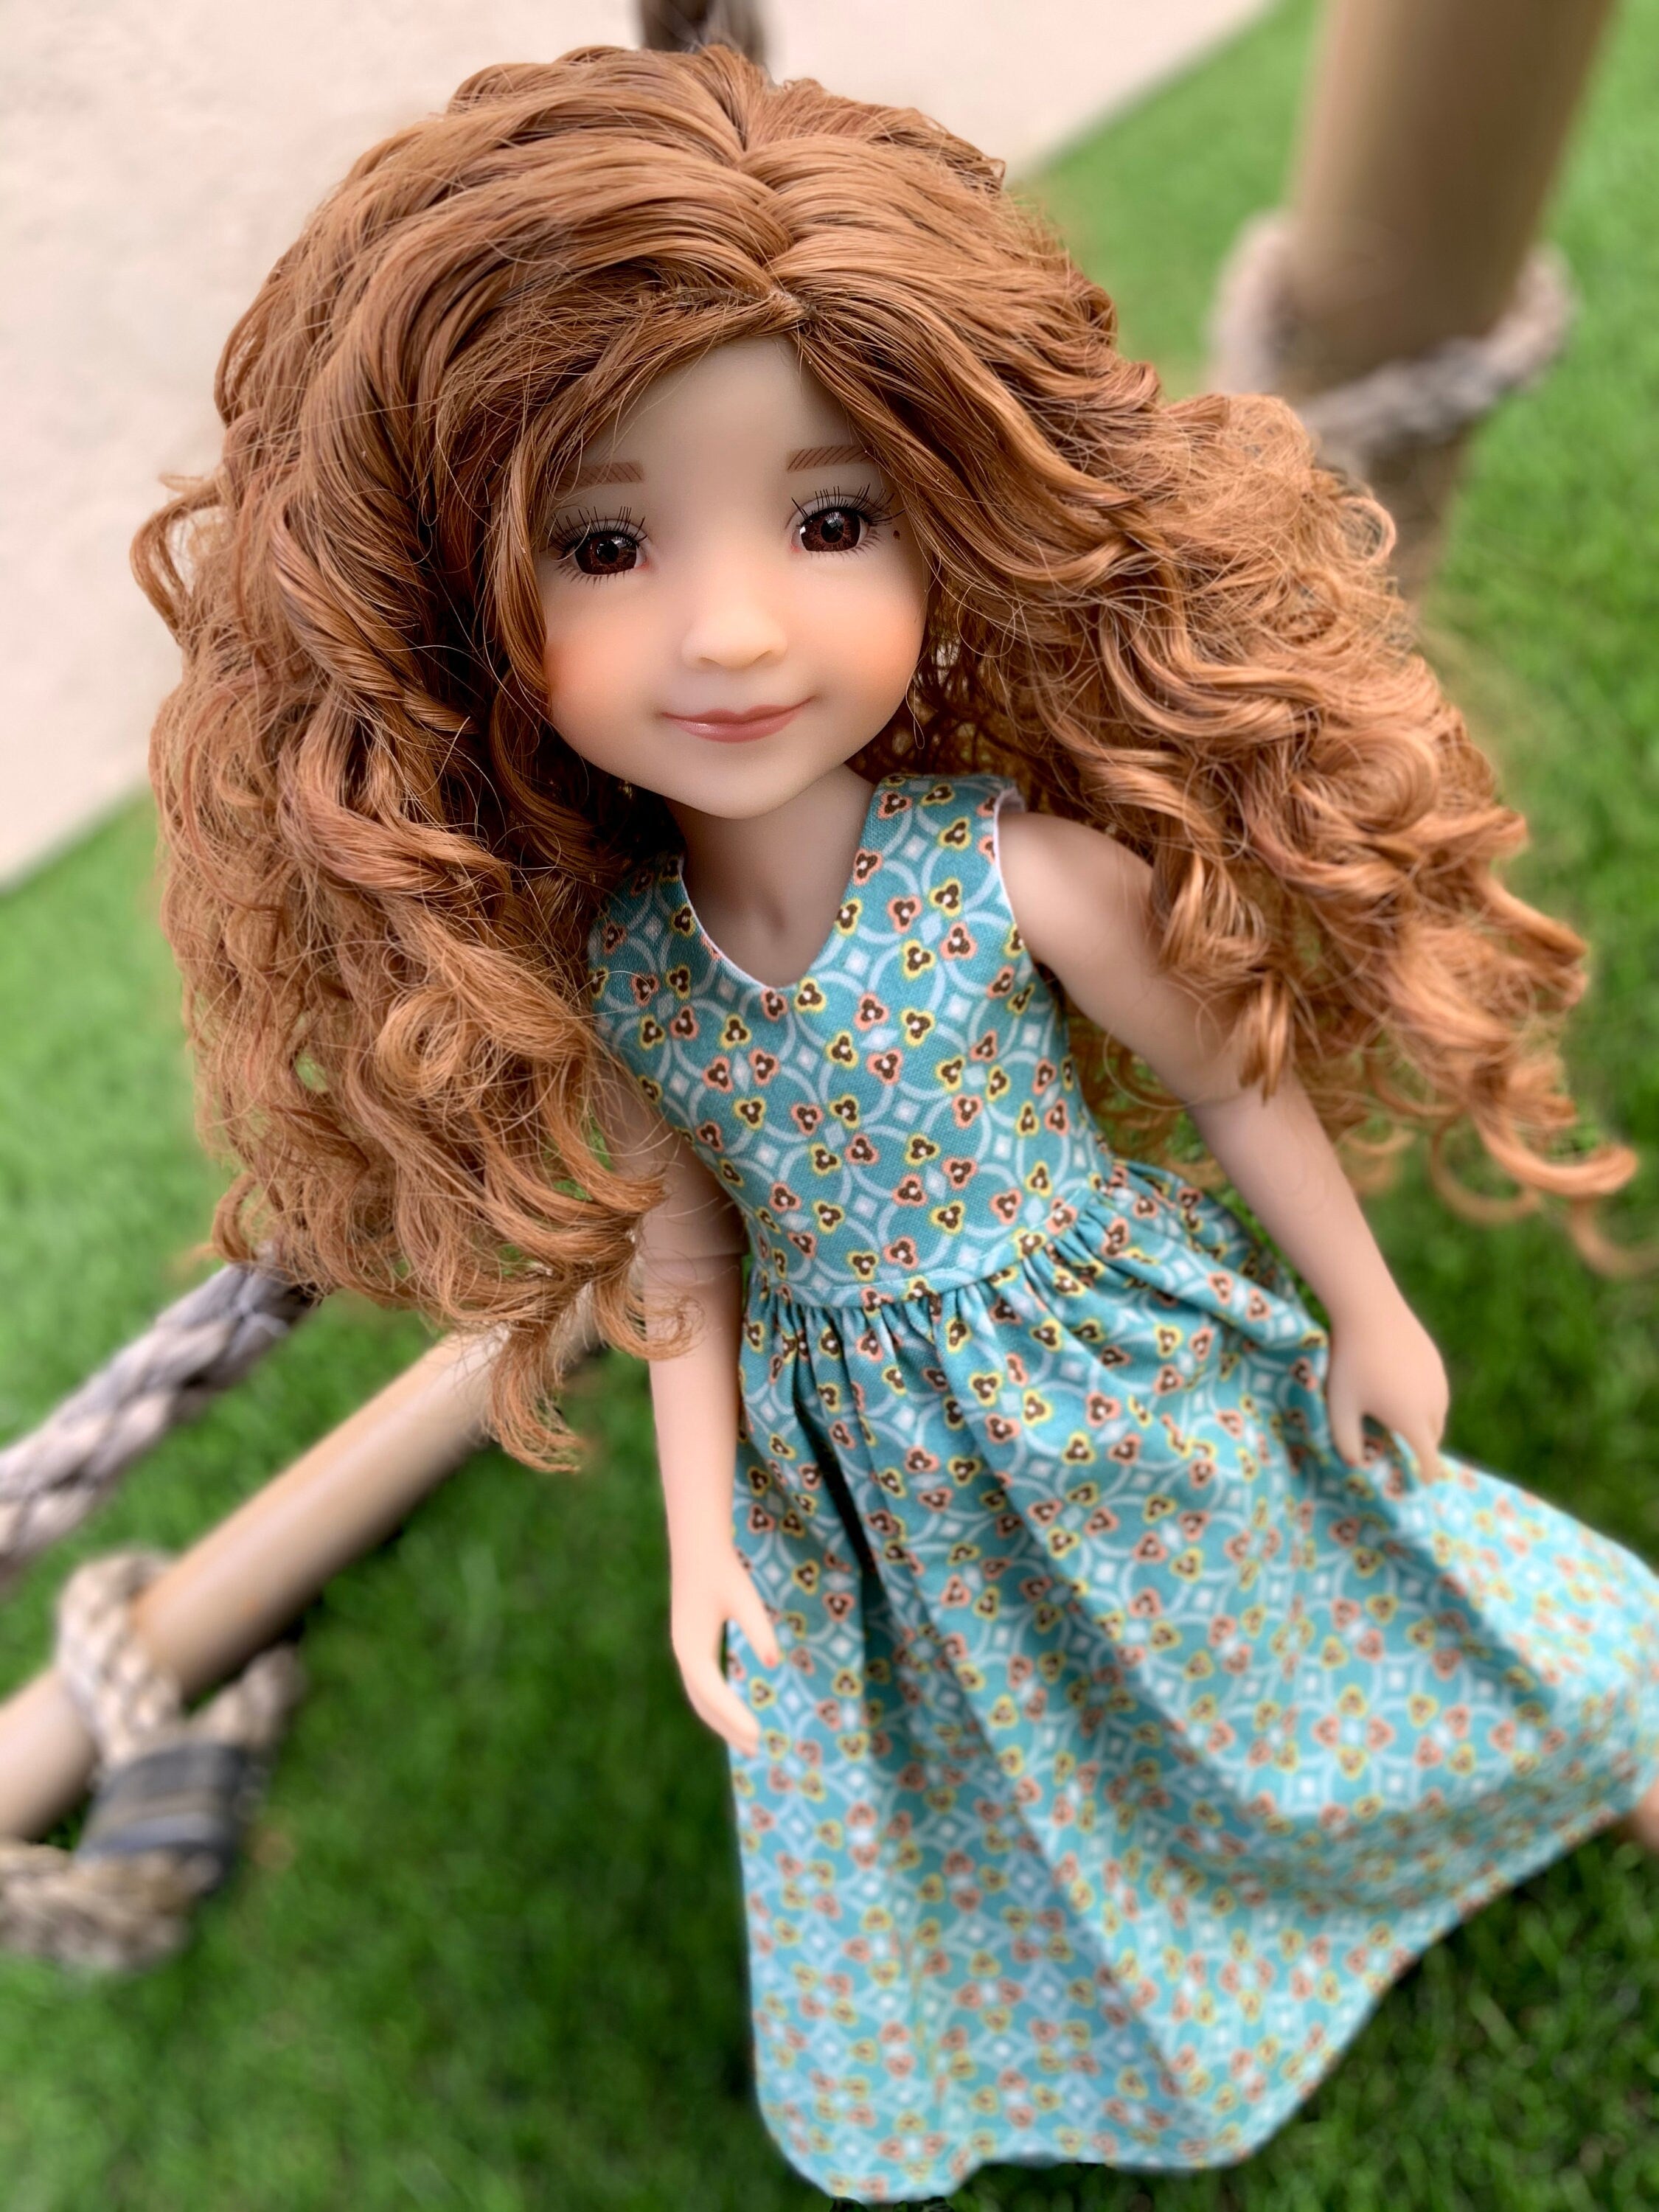 Custom  doll Wig for 14"  AG Dolls - Heat Safe-Tangle Resistant-fits 8-9" head size Kaye Wiggs  RRFF girls of the orient SNUG fit